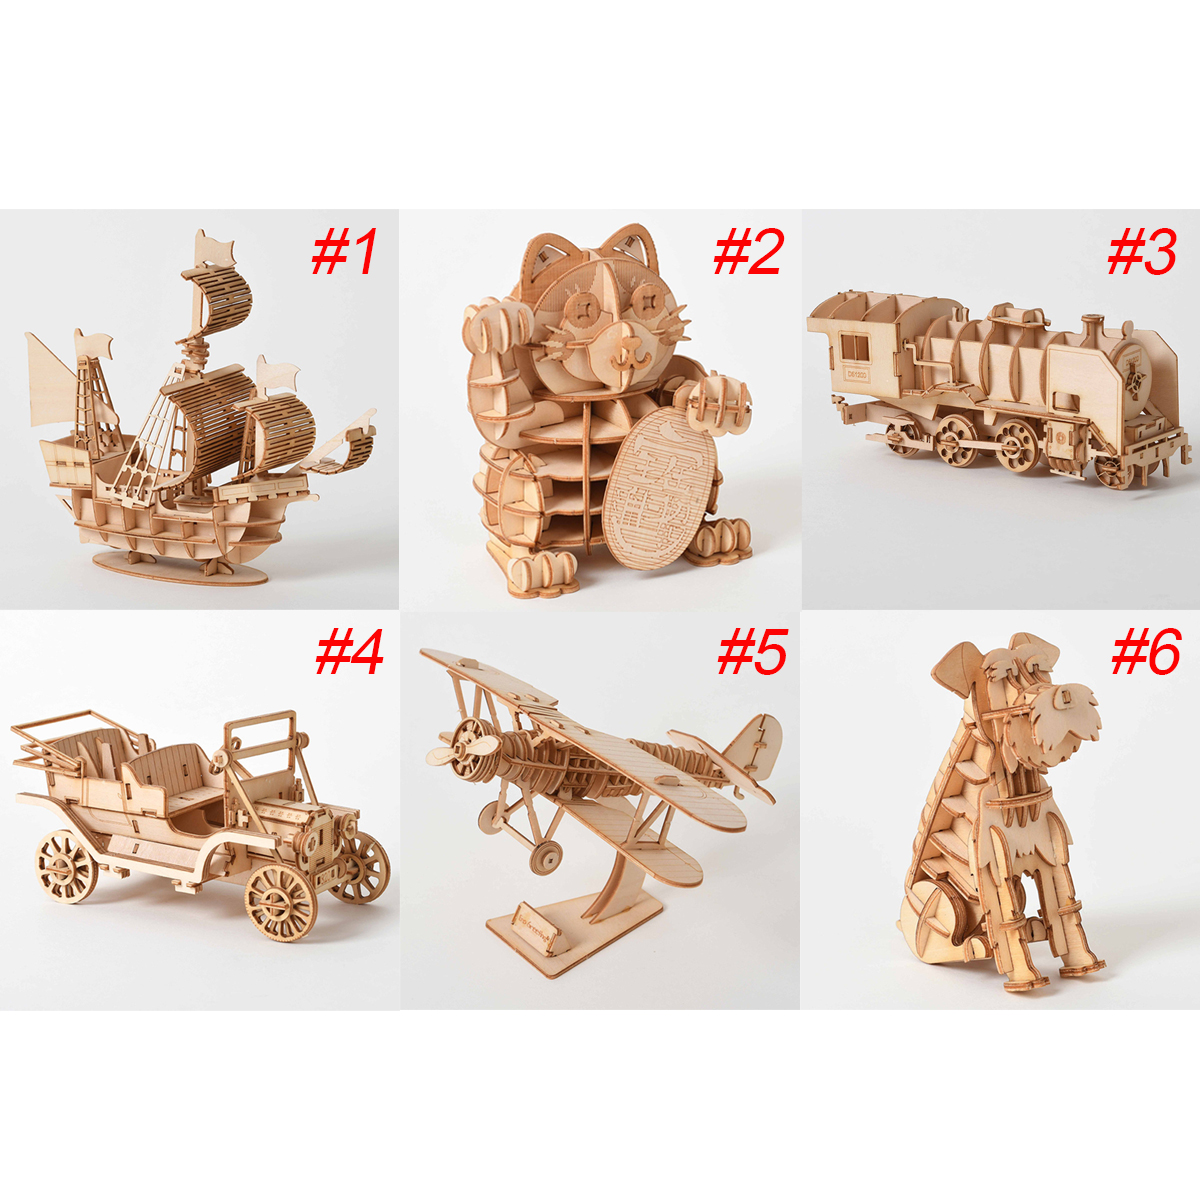 3D-Wooden-Puzzle-Assembly-Model-DIY-Animal-Cat-Wood-Craft-Kids-Educational-Toys-Gift-1647393-3